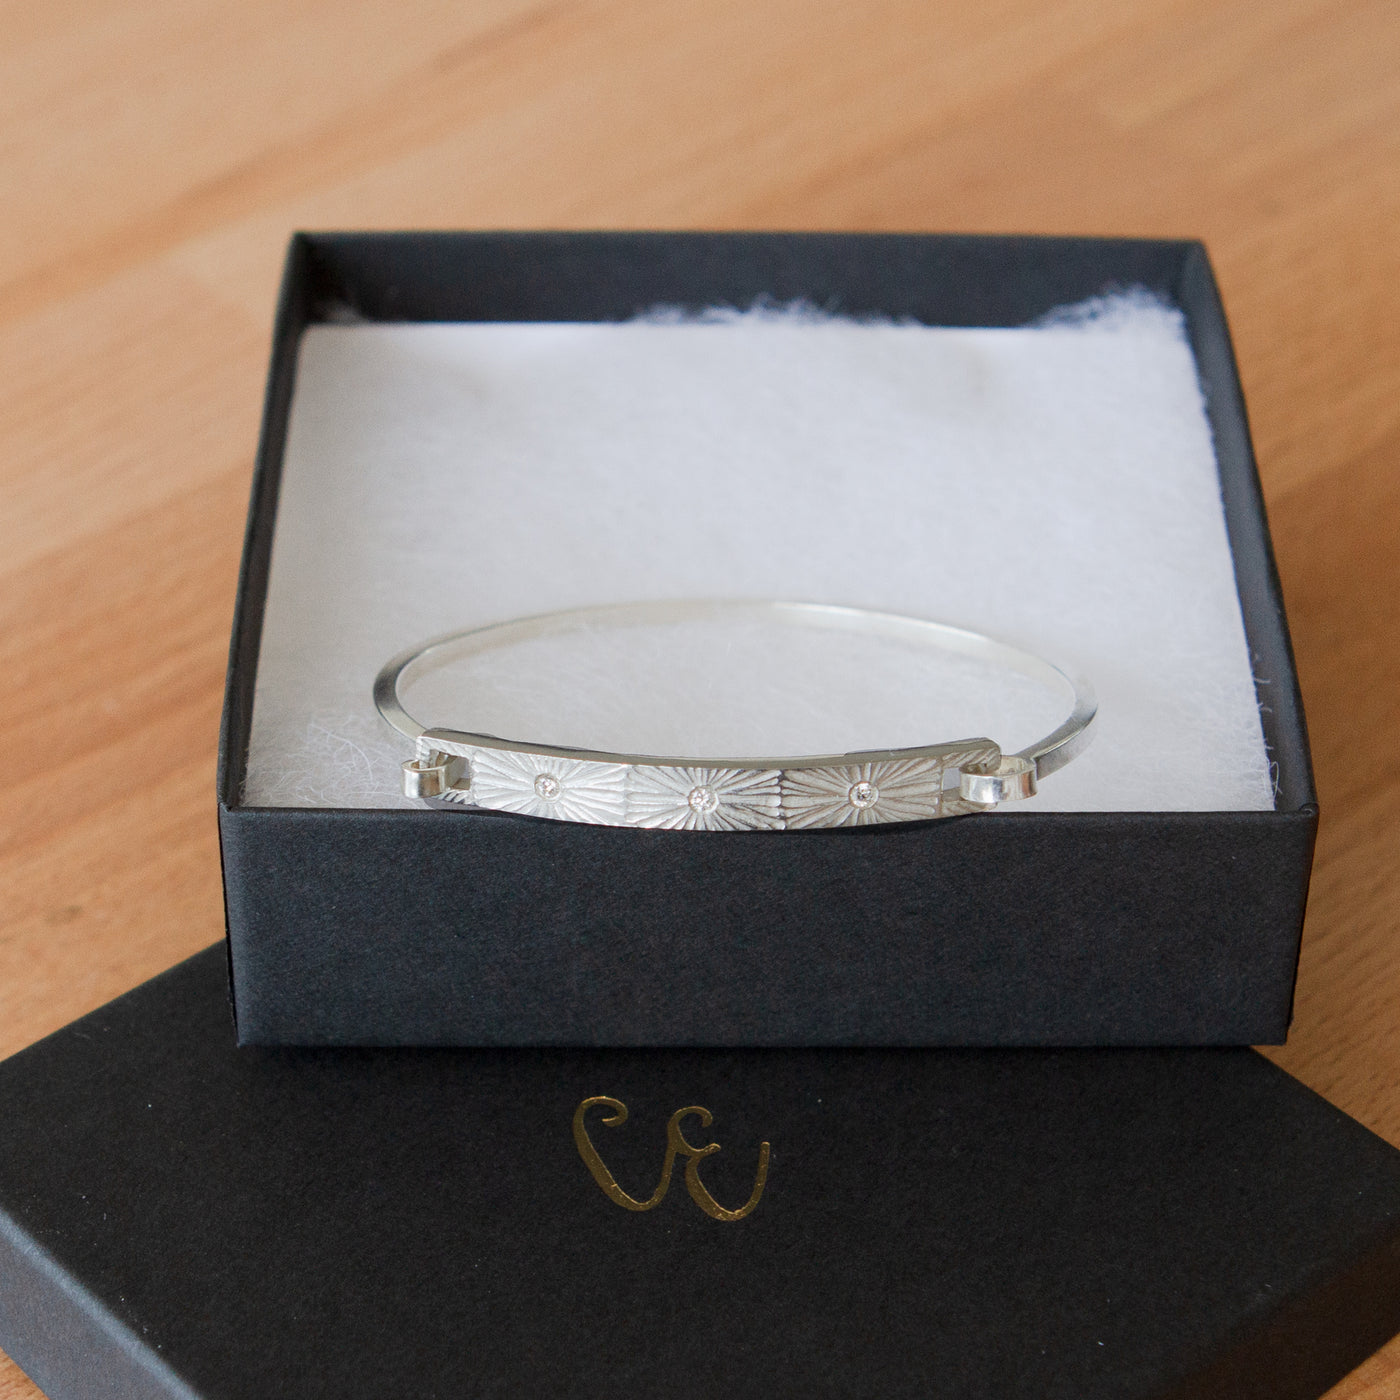 Sterling silver bar bracelet with three diamonds and a carved sunburst around each by Corey Egan in a gift box